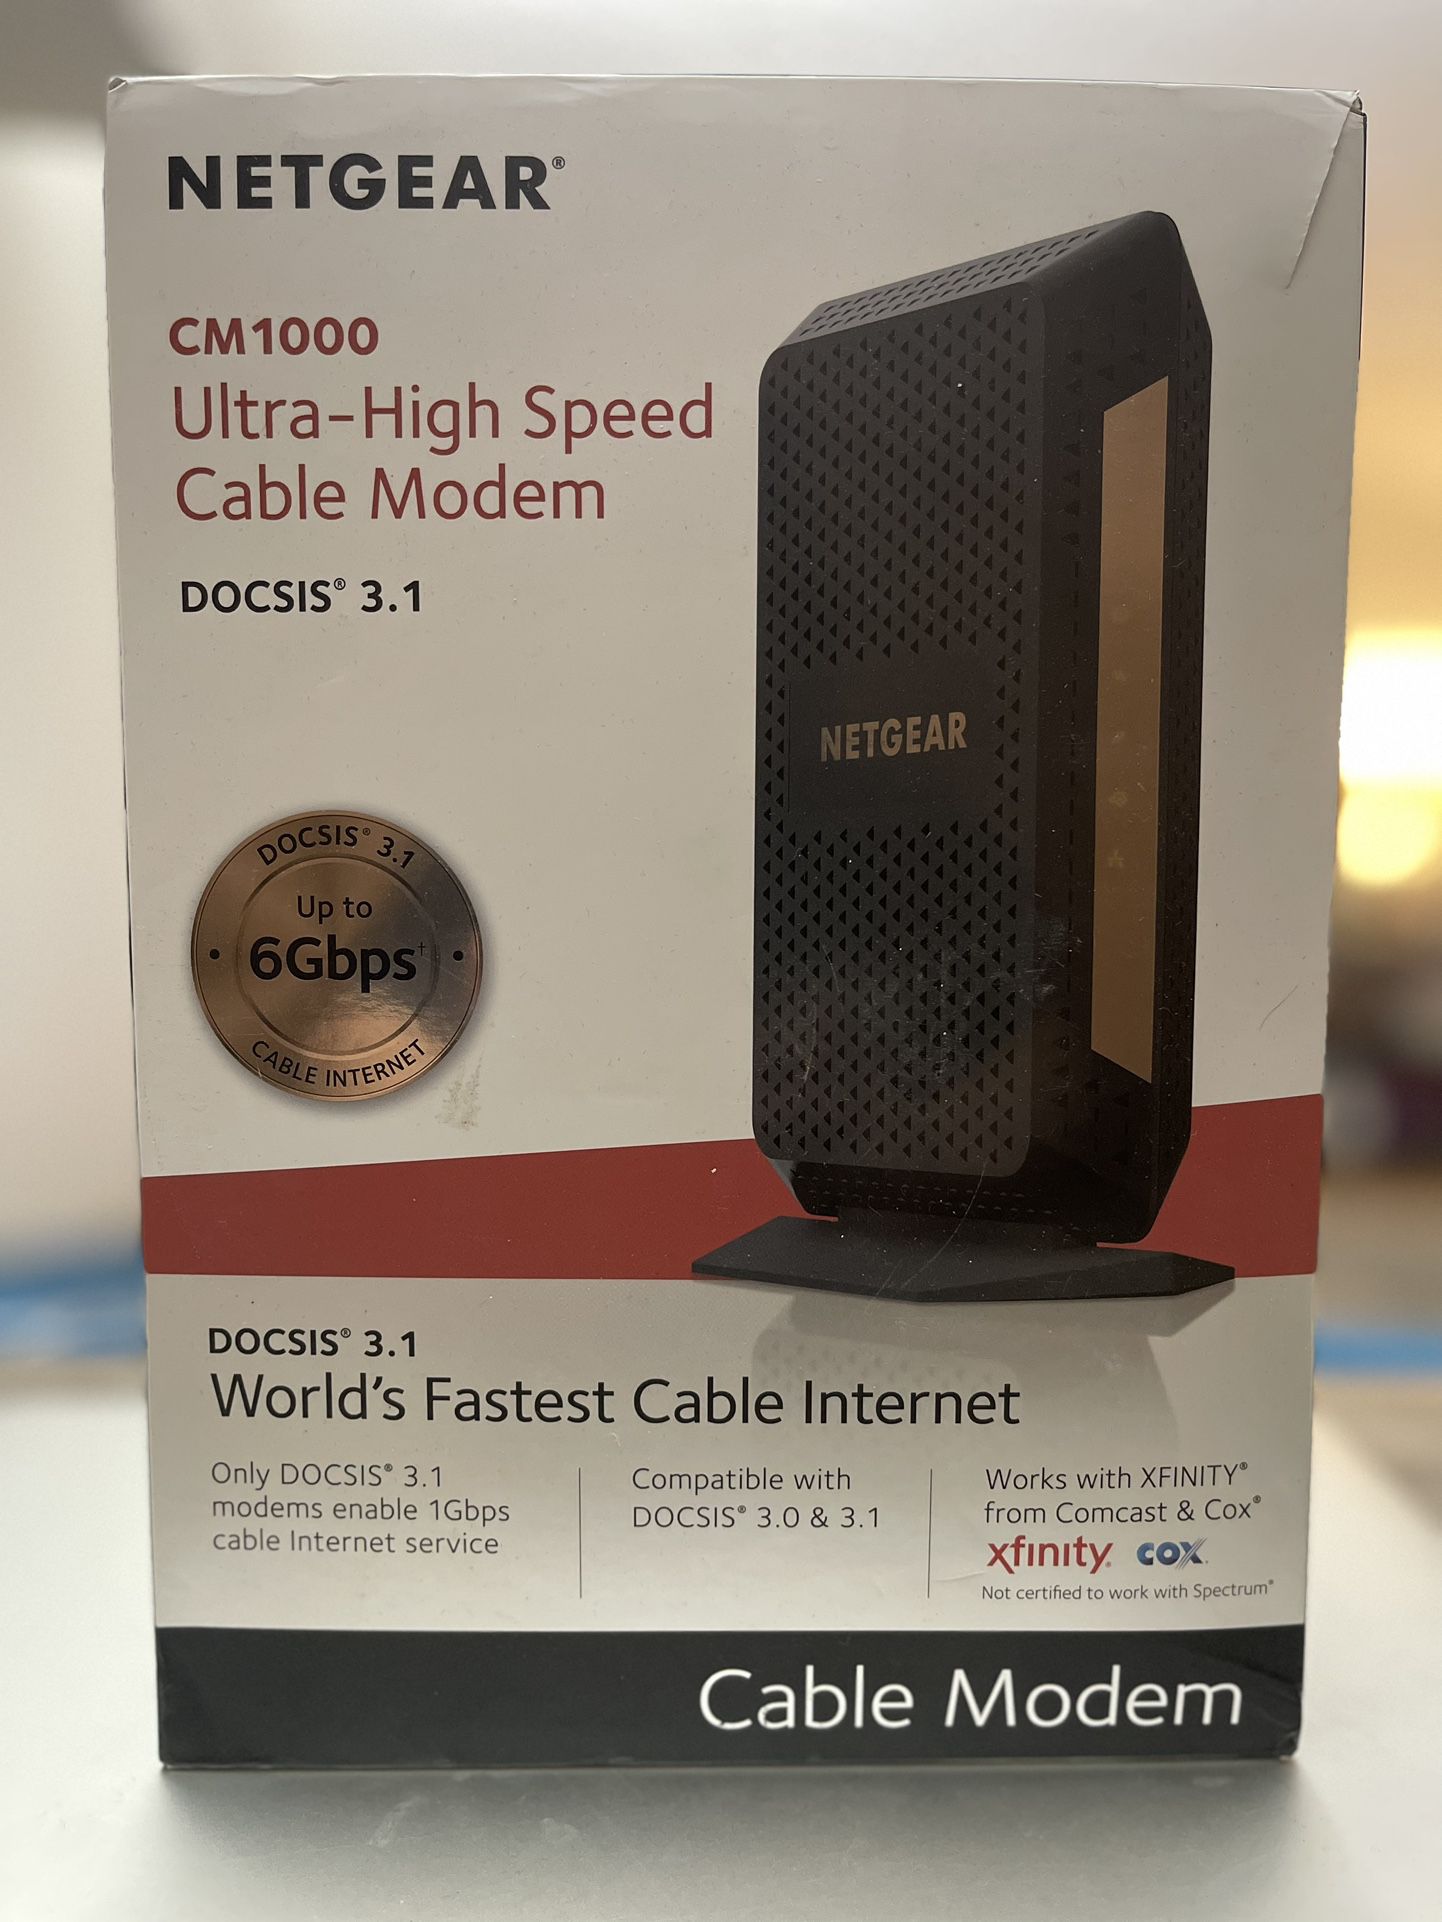 Gently Used Cable Modem - Netgear CM1000